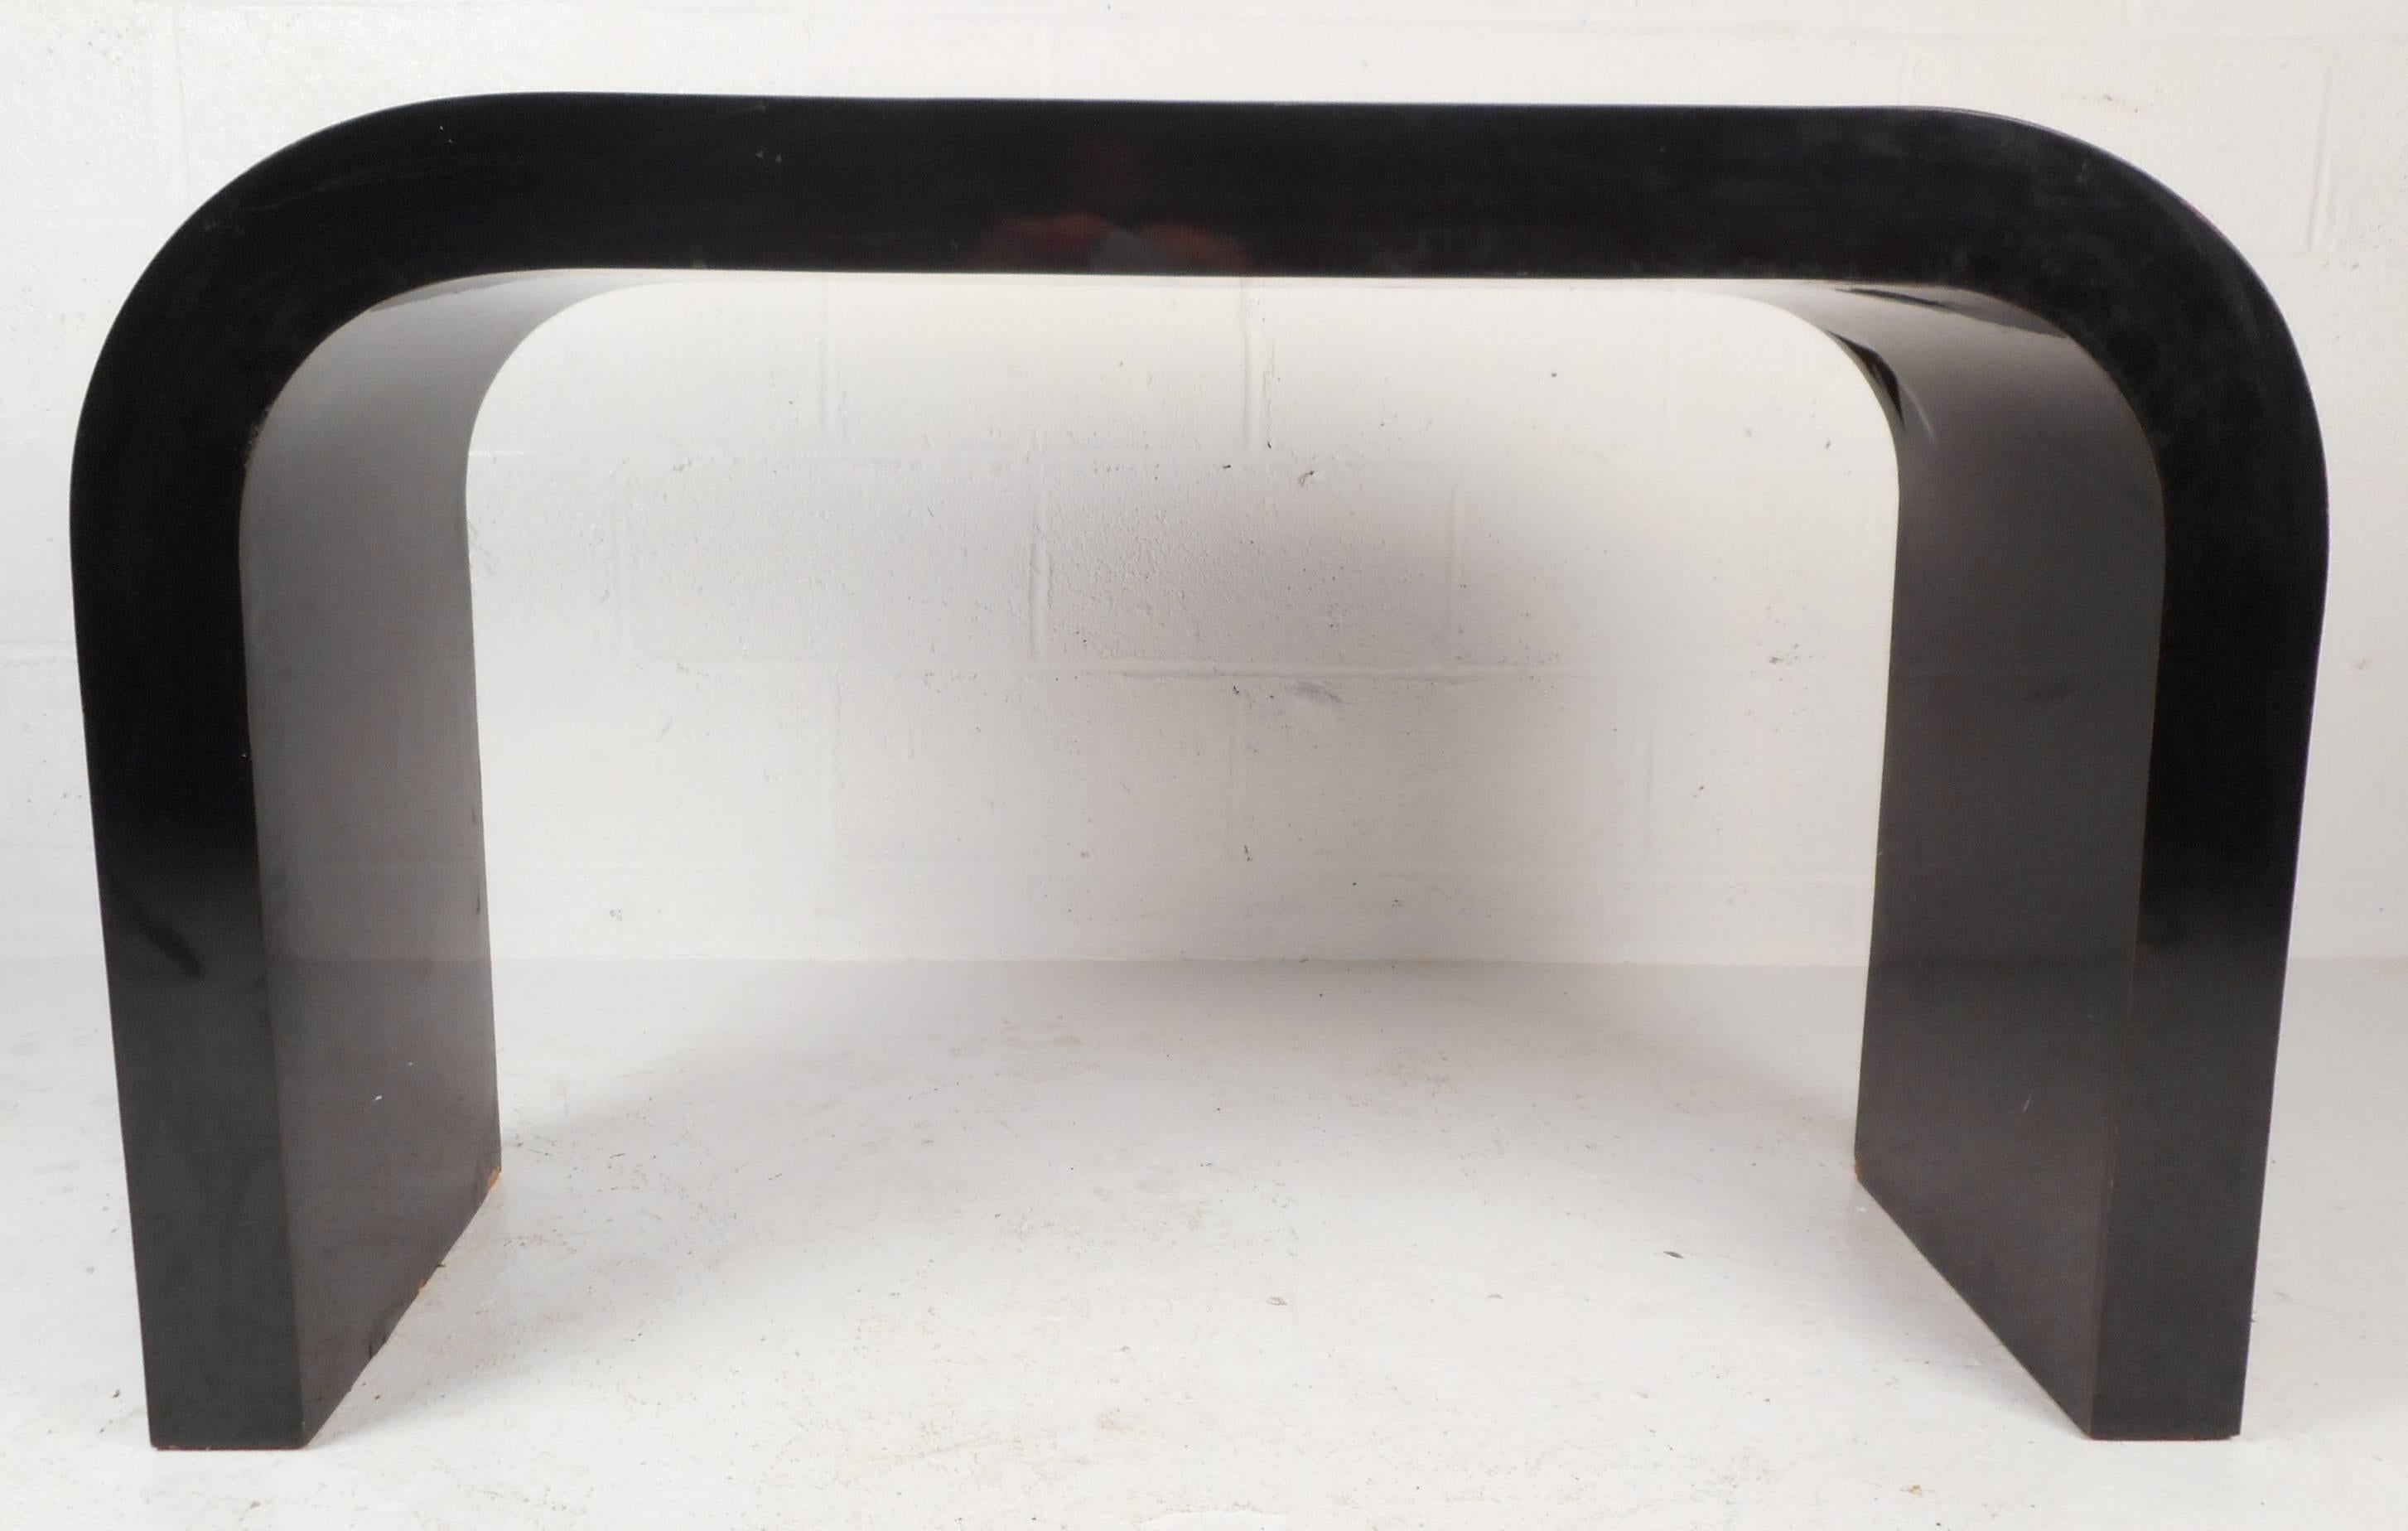 Stunning vintage modern waterfall console table features a sleek black laminate finish and smooth rounded edges. The unique design fits perfectly in any entry way, hallway, or behind the sofa. Please confirm item location (NY or NJ).